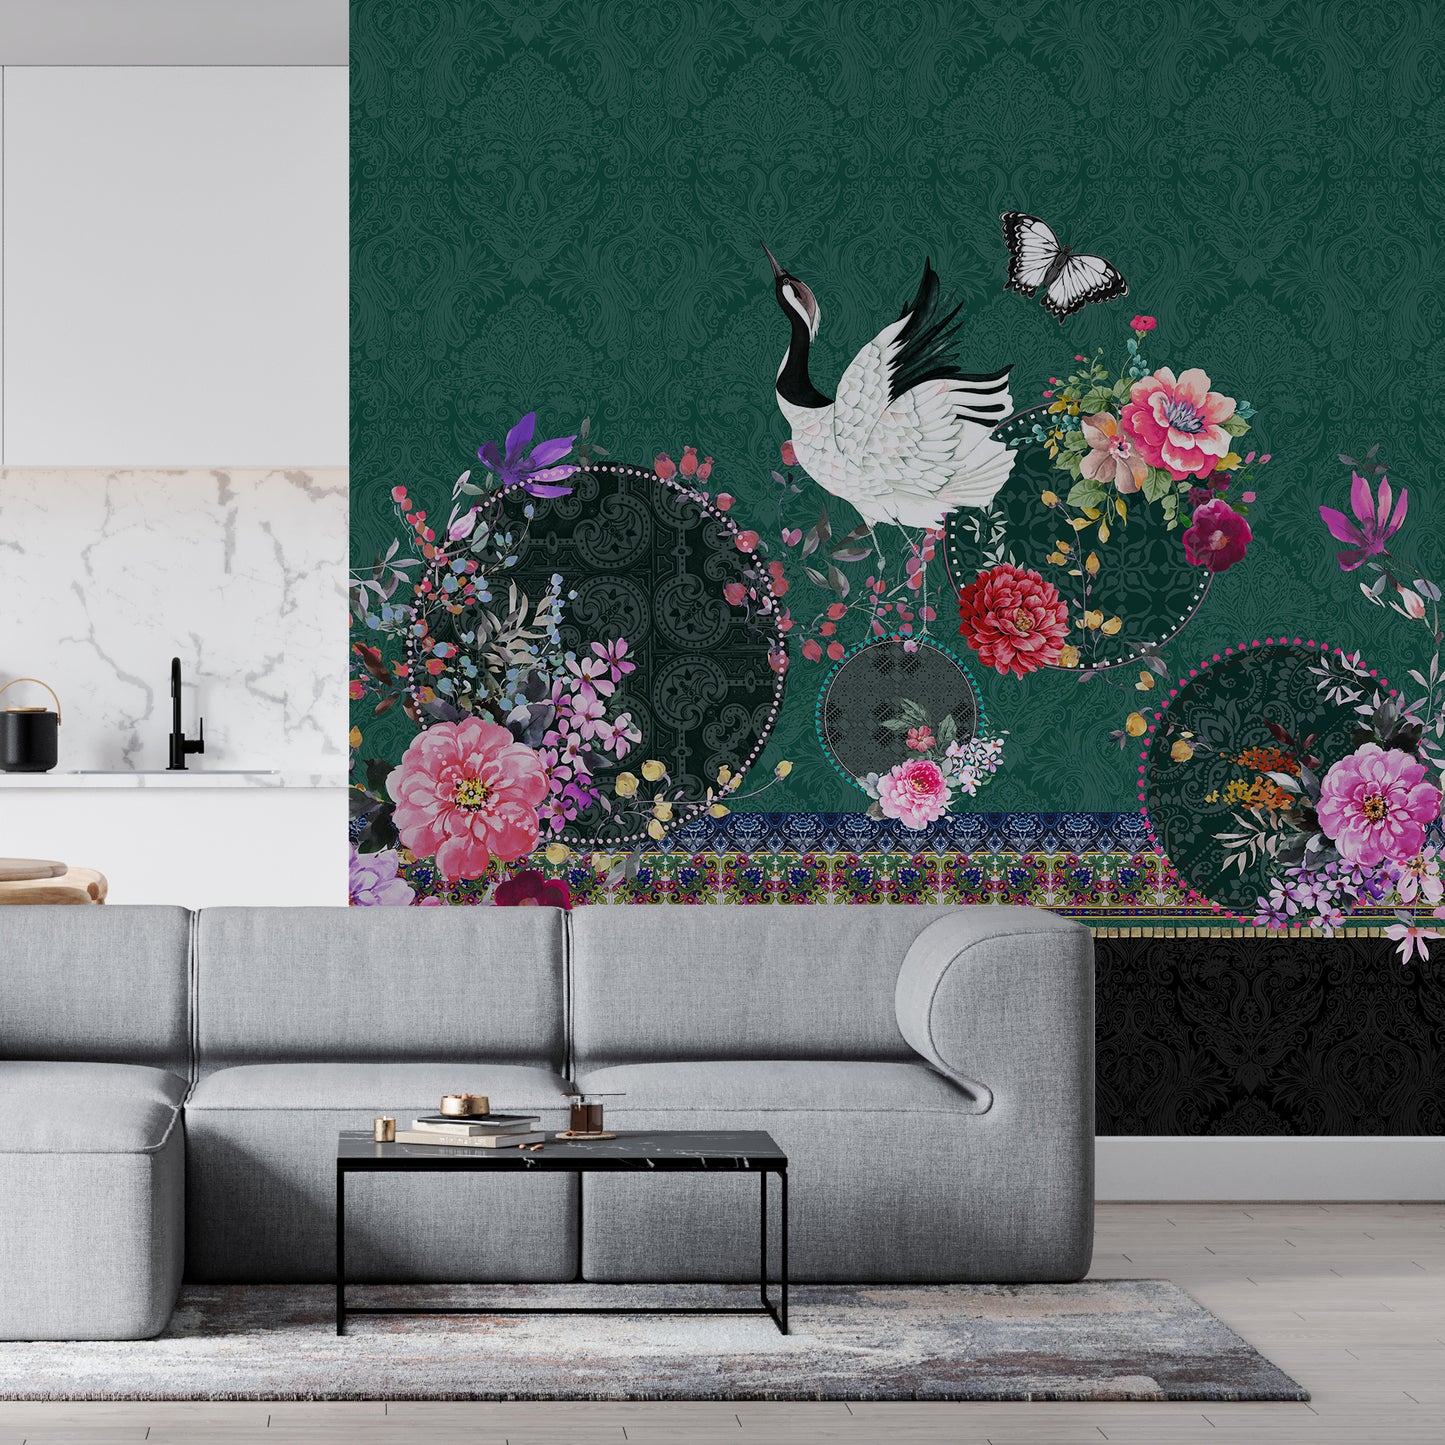 Melli Mello Craney in paradise Wallpaper crane floral colorful green deco eyecatcher be different living room deco style a corner